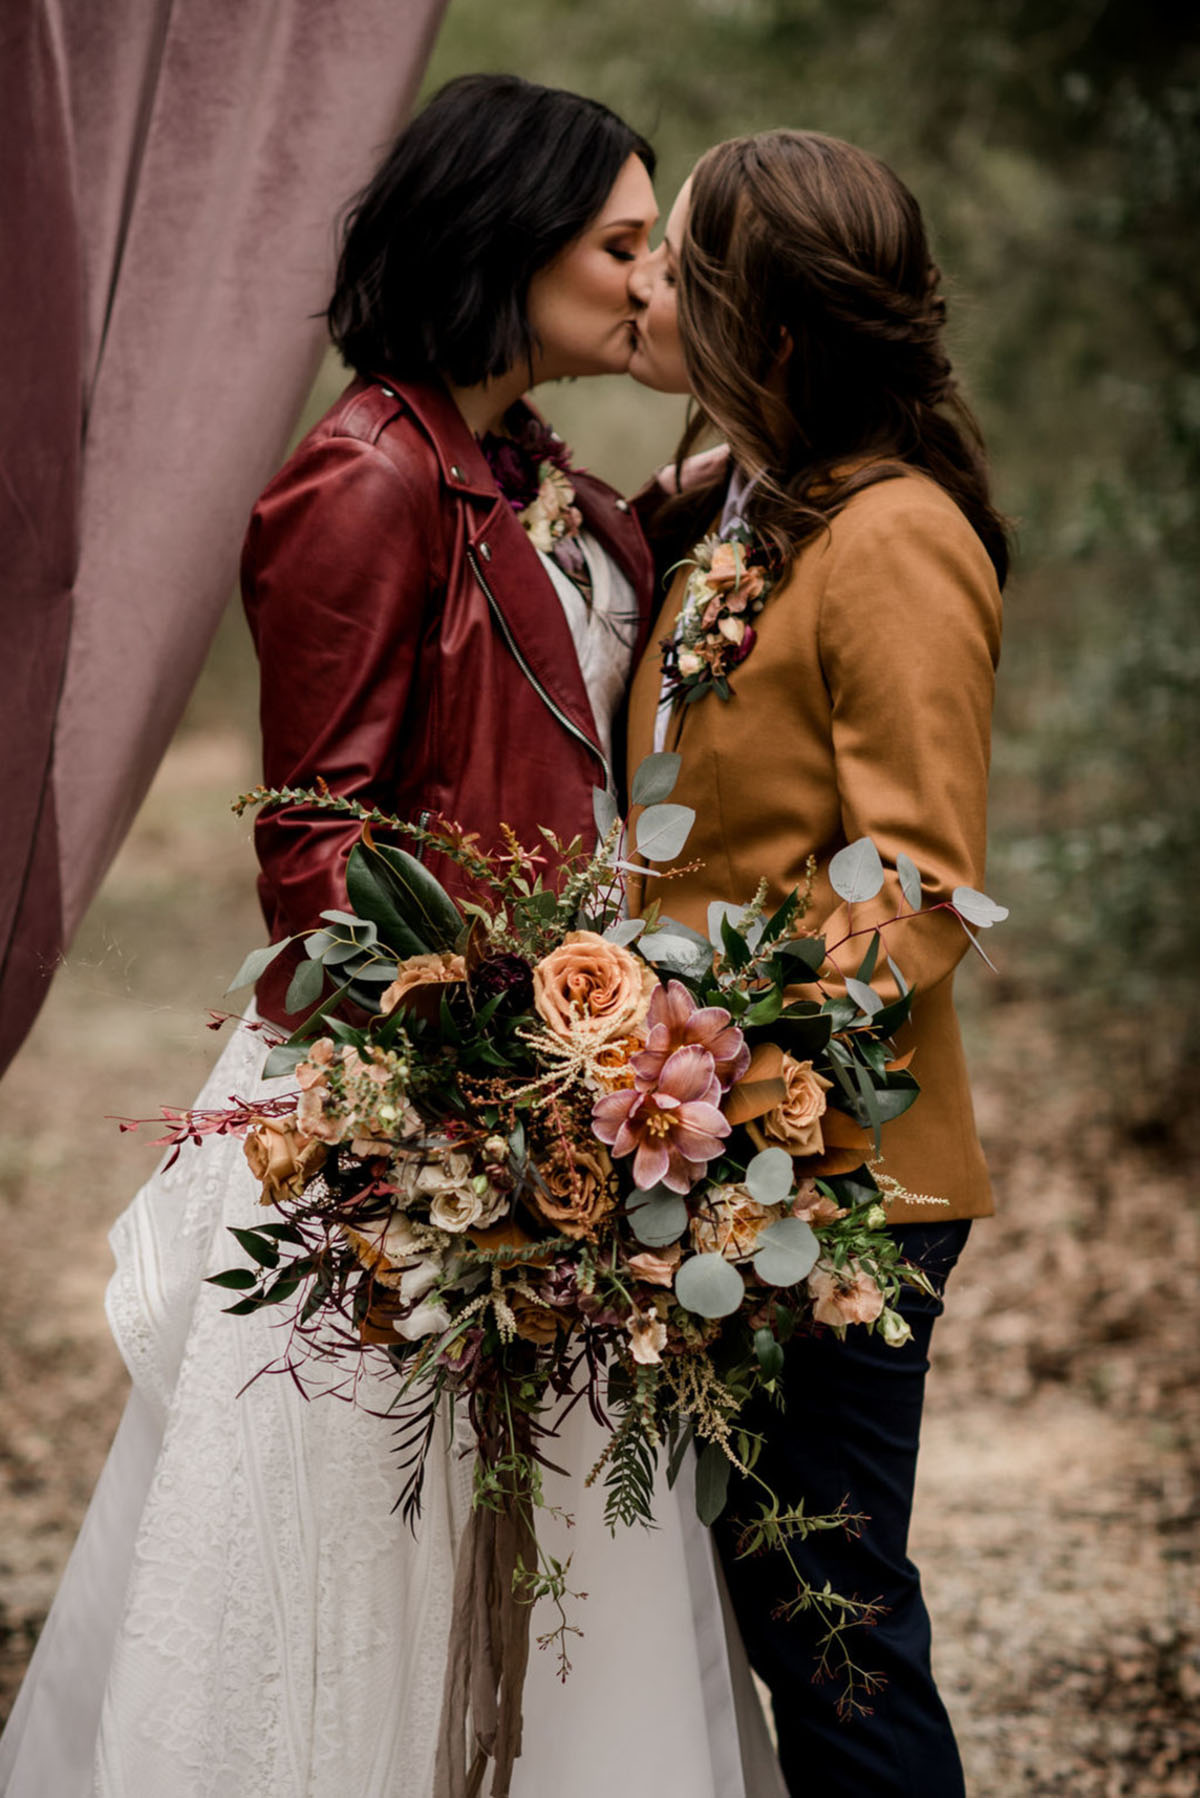 Floral bohemian forest wedding inspiration on a bridge two brides lesbian wedding long white dress tan suit jacket red leather jacket romantic moody kiss